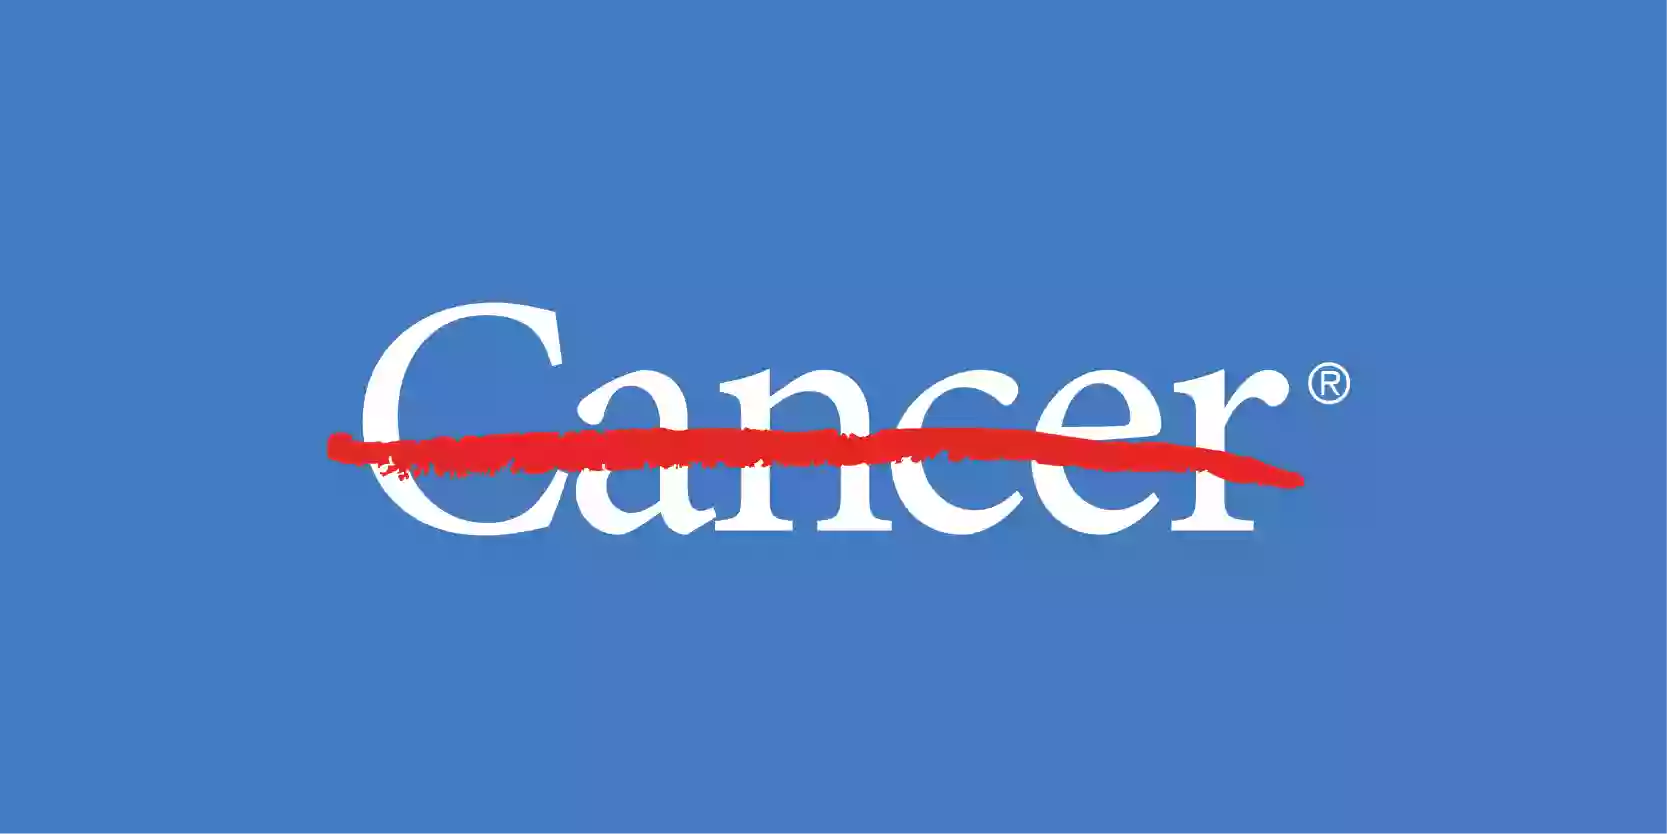 The University of Texas MD Anderson Cancer Center